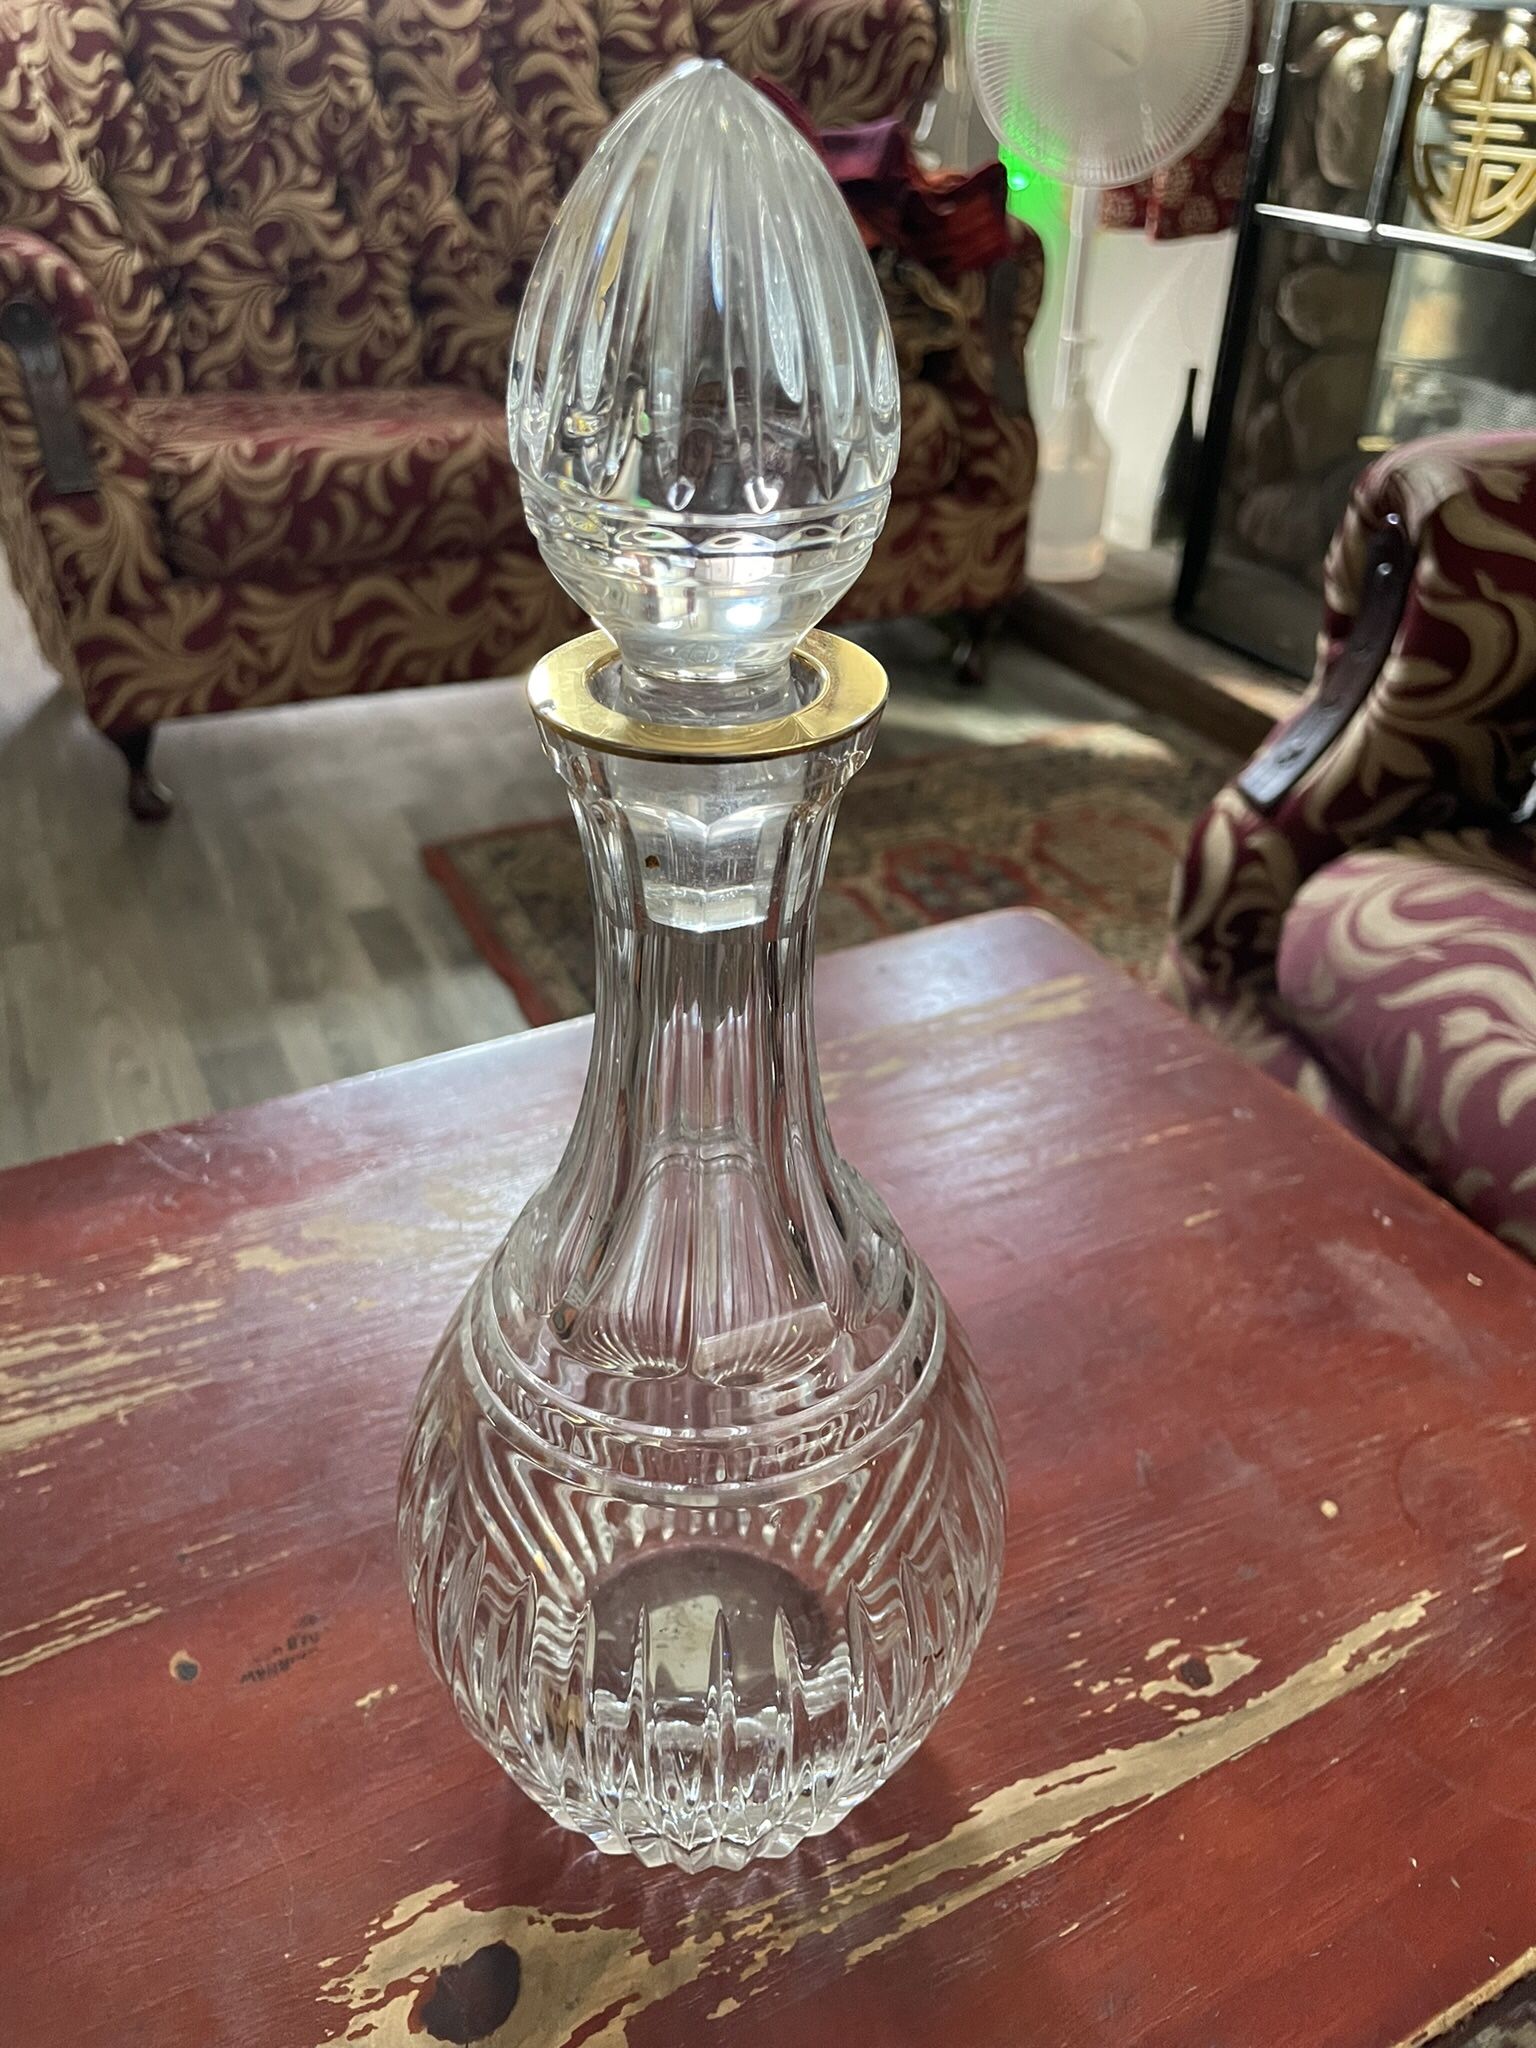 Only $185 Selling my Decanter & Stopper in the Hanover Gold pattern by Waterford